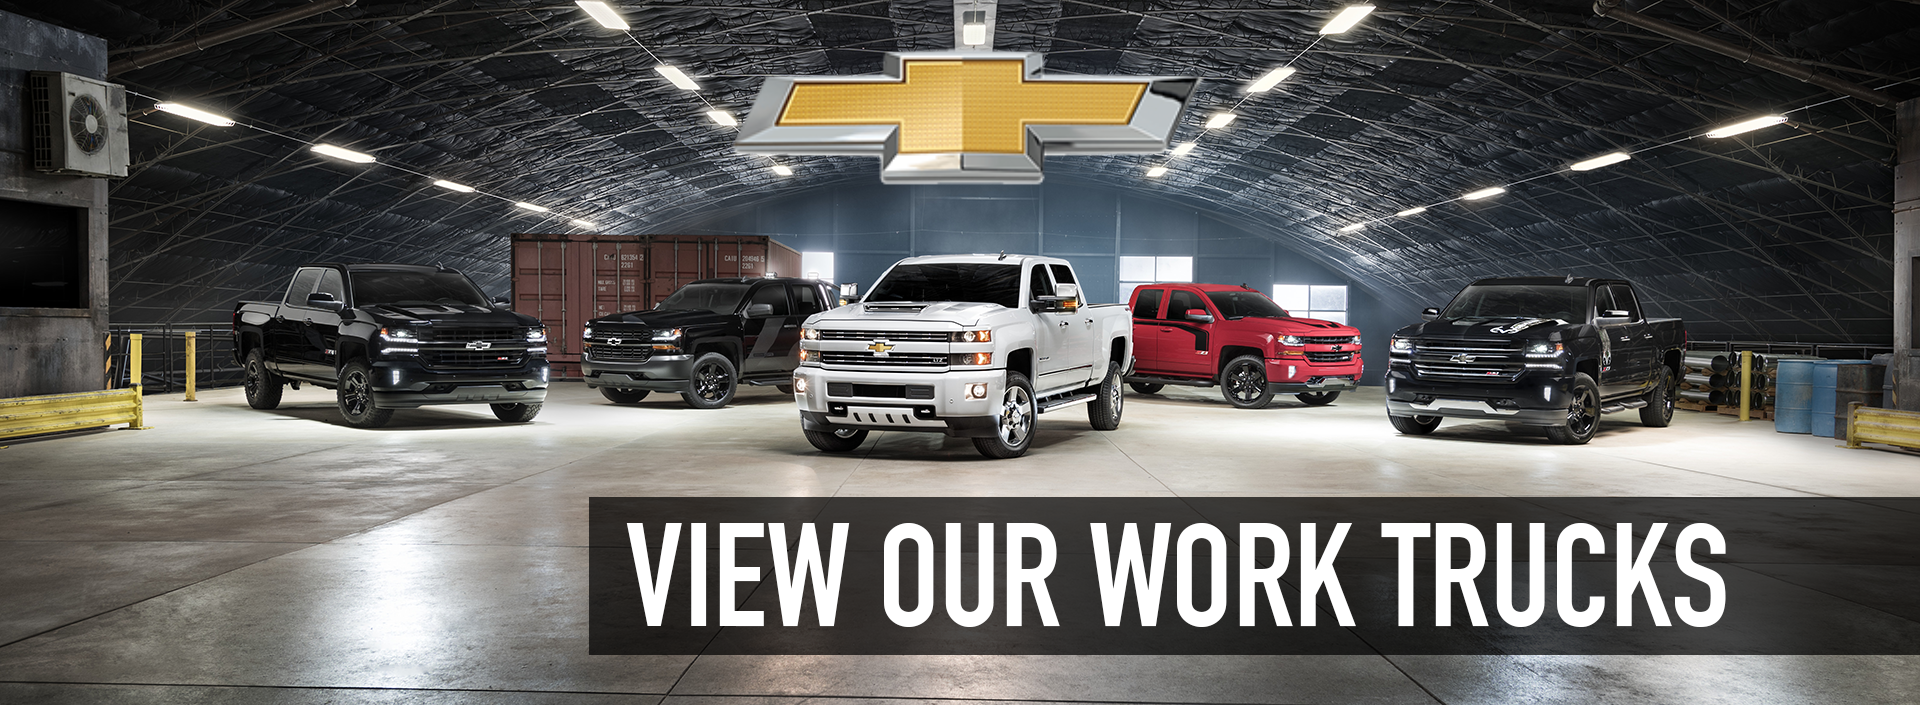 View Our Work Trucks | Lou Bachrodt Family of Dealerships